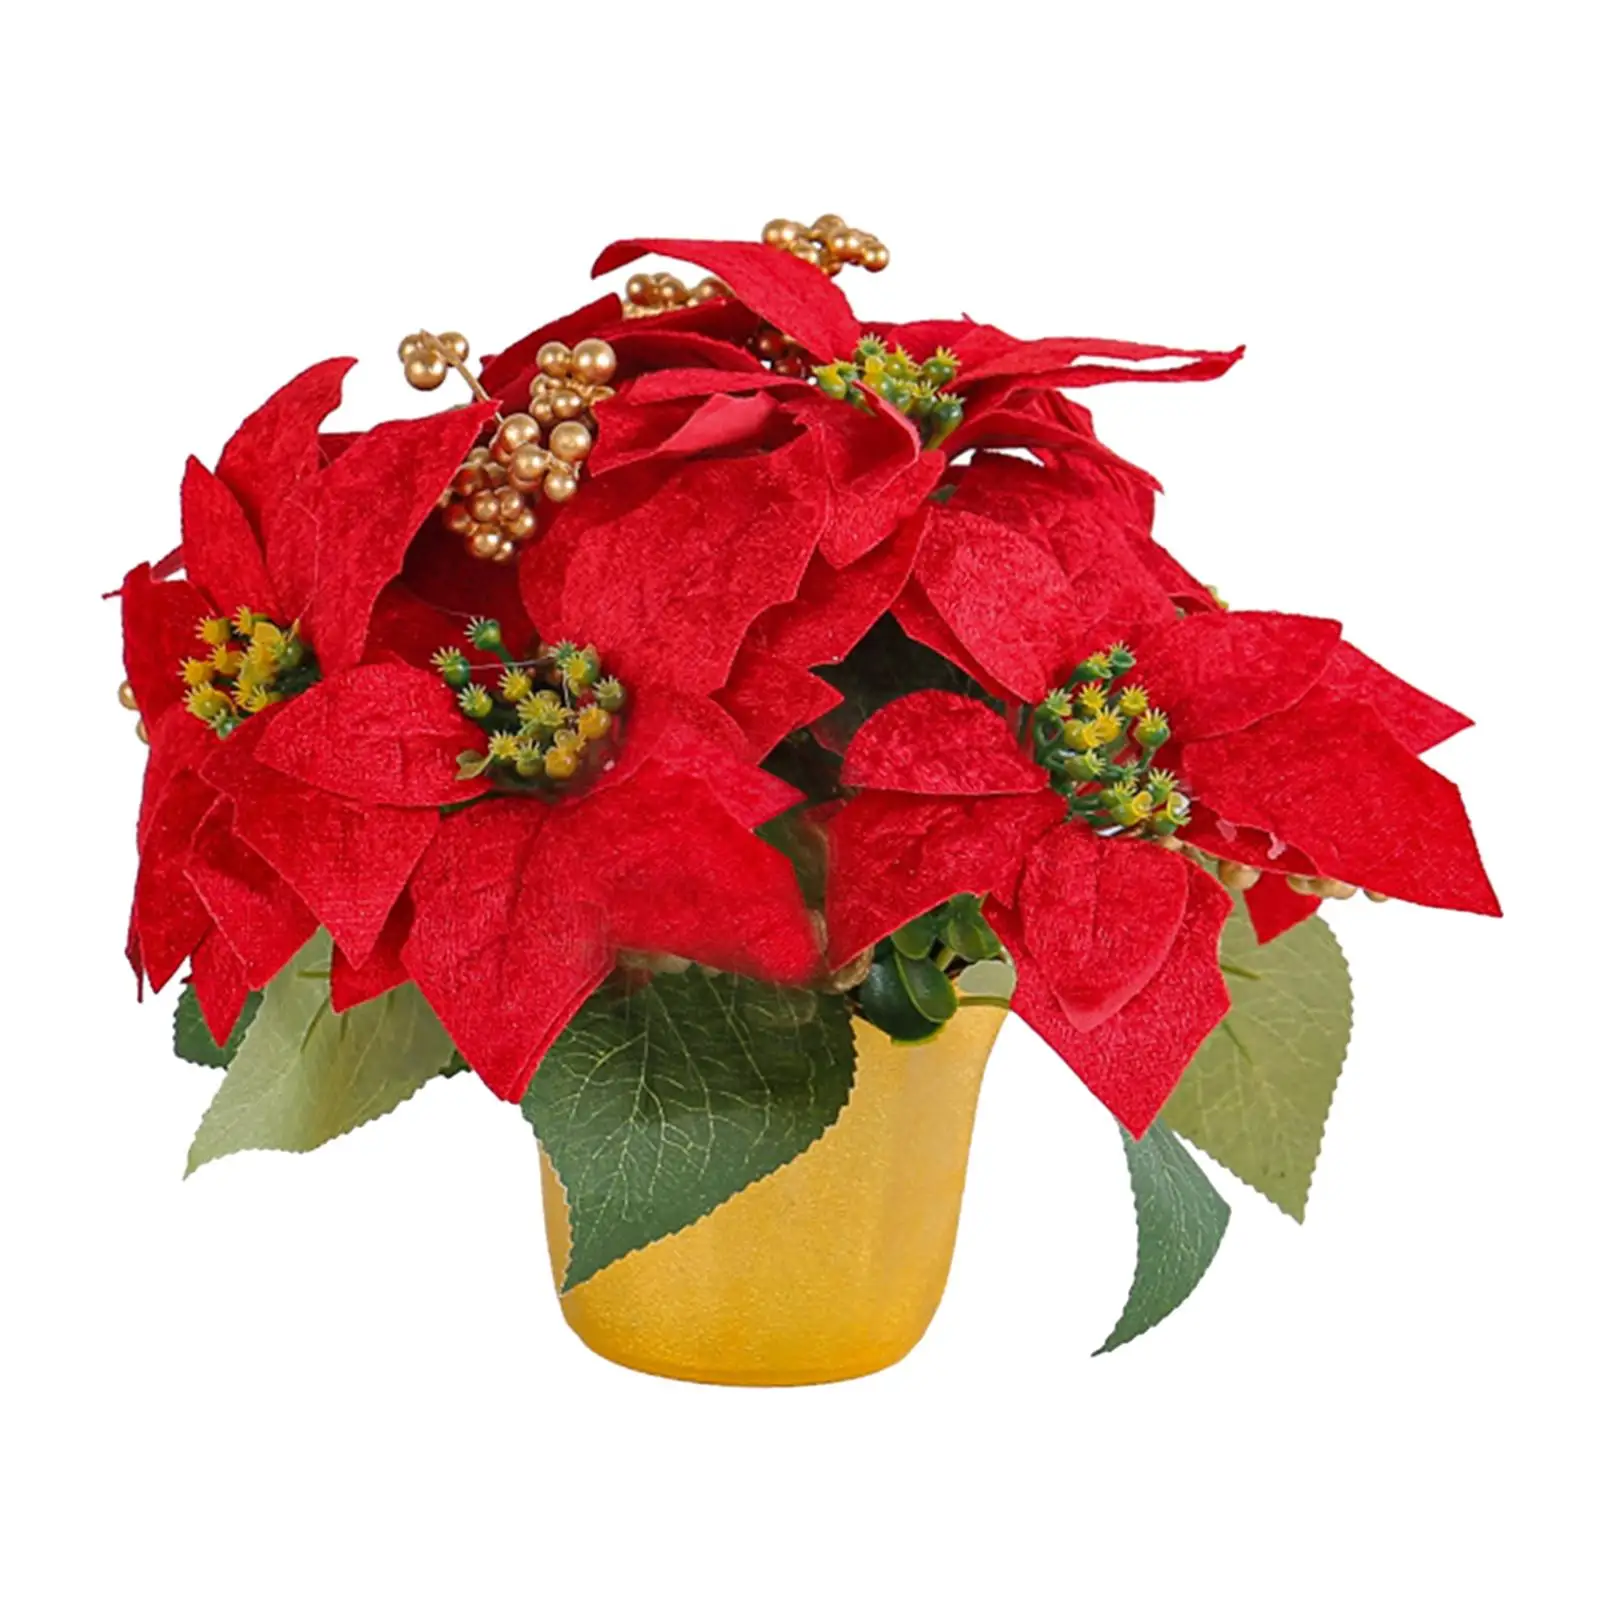 Potted Red Poinsettia Artificial Red Poinsettia Plant for Table Centerpiece